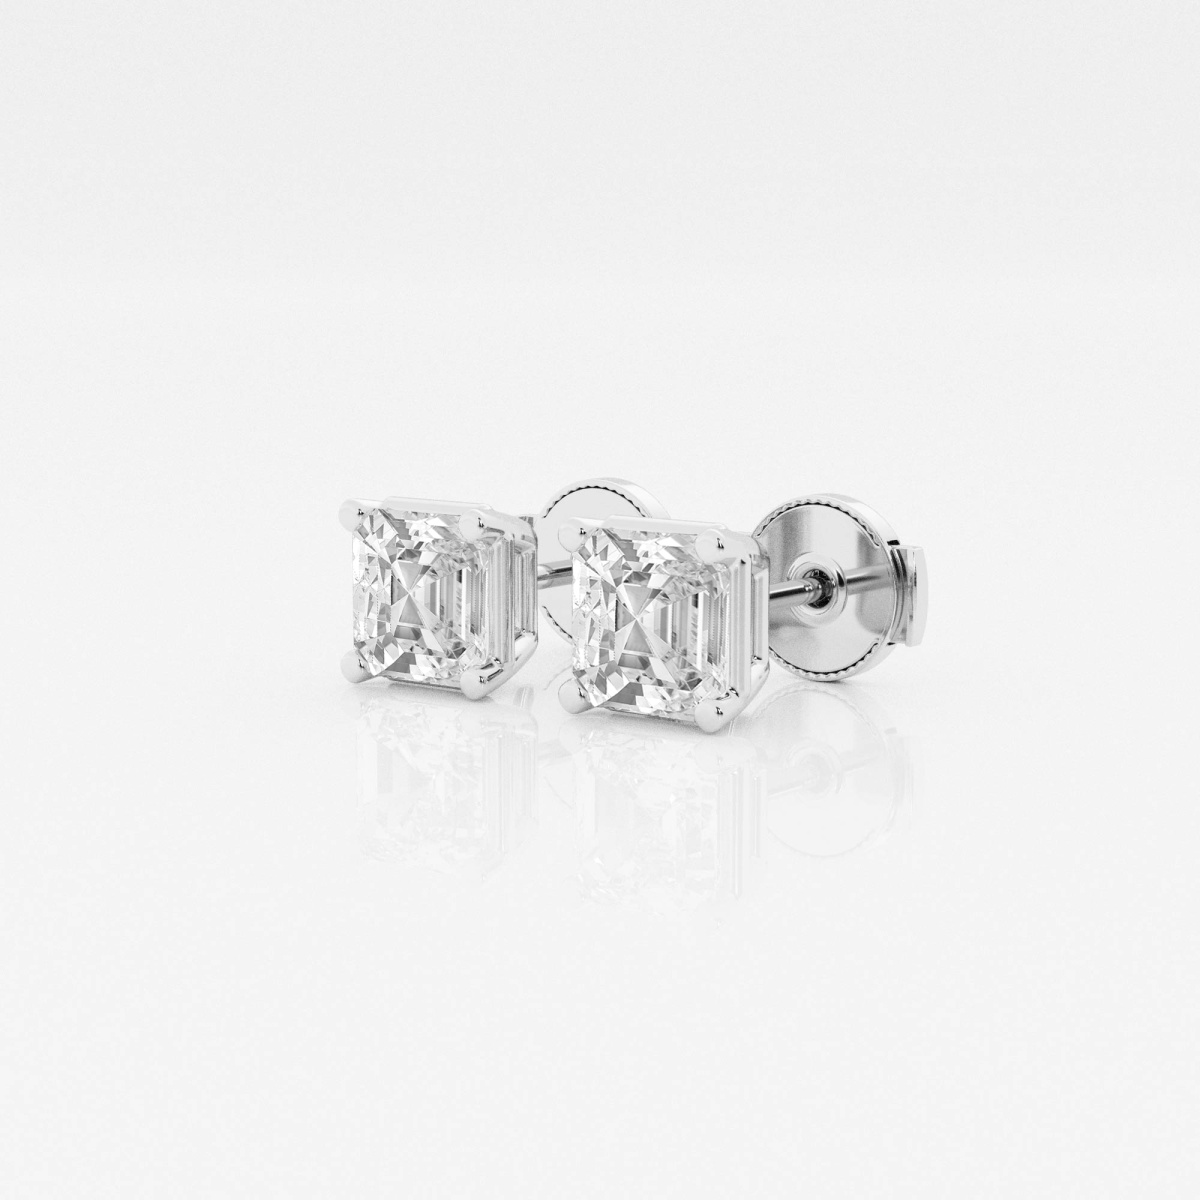 Additional Image 1 for  2 ctw Asscher Lab Grown Diamond Solitaire Stud Earrings